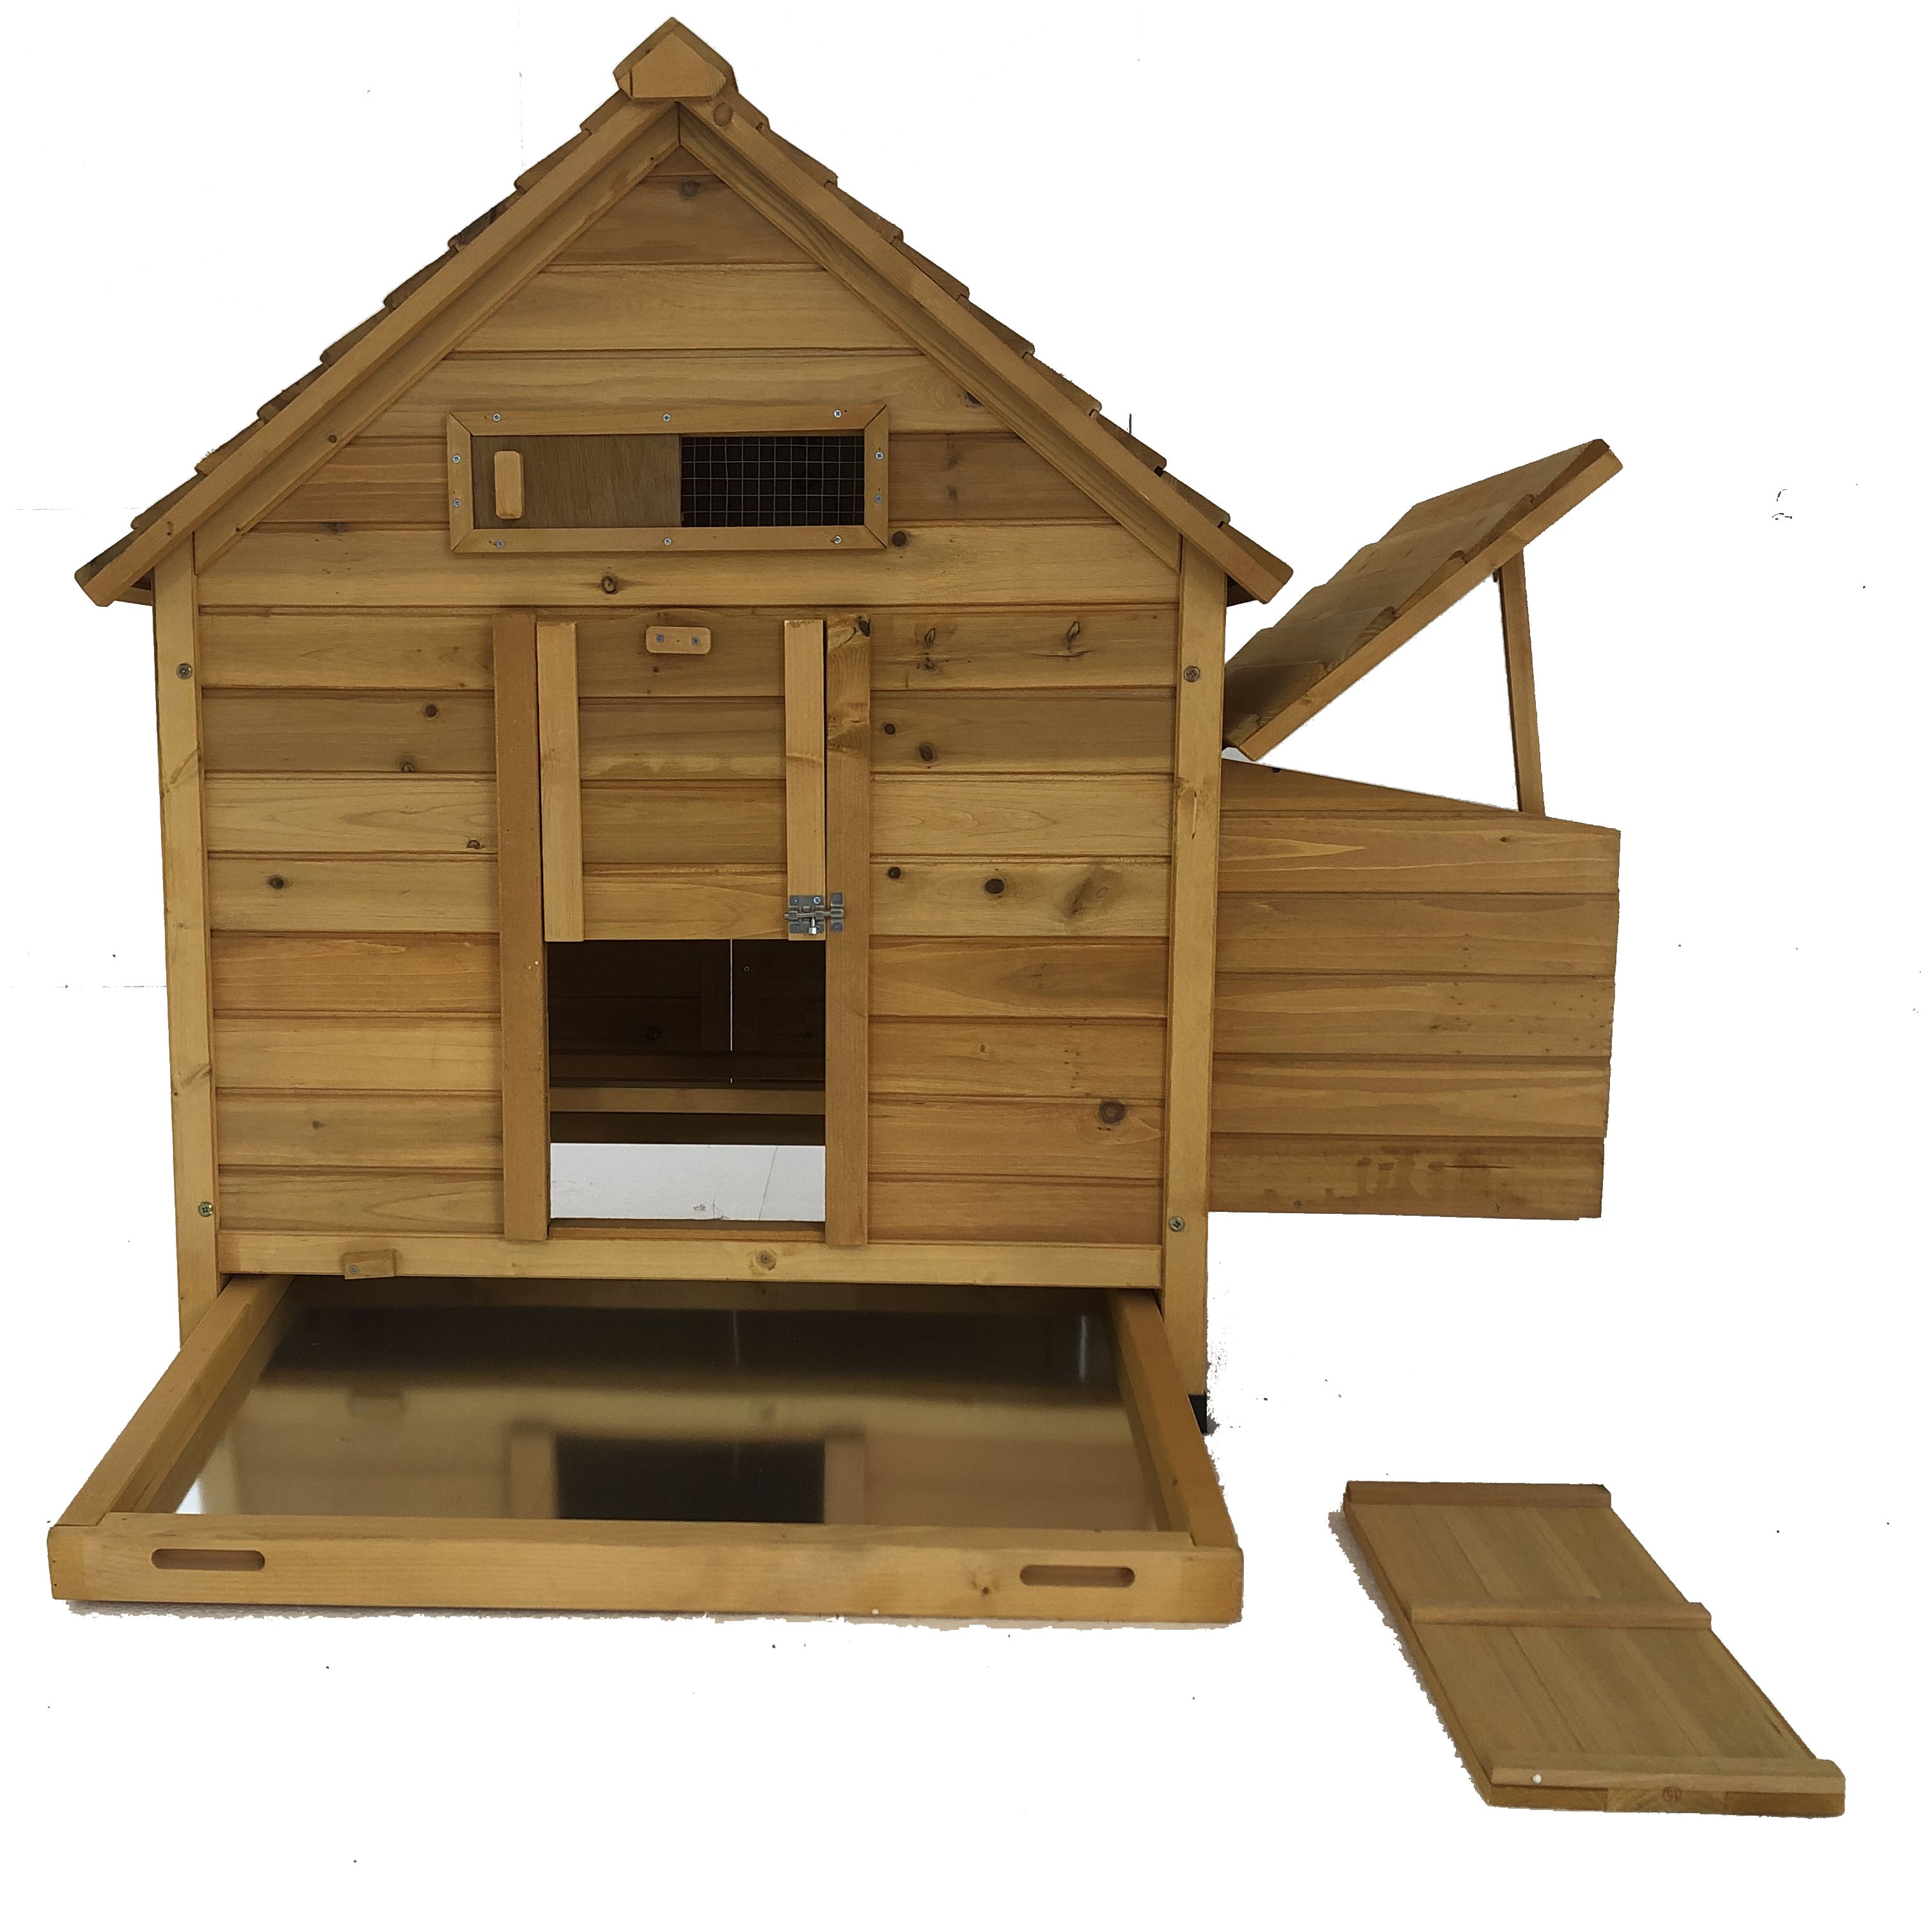 Hot Selling for Hatching Chicken Eggs For Sale -
 Small Animal Cage Bunny Hutch with Removable Tray and Ramp wooden chicken coop – Easy